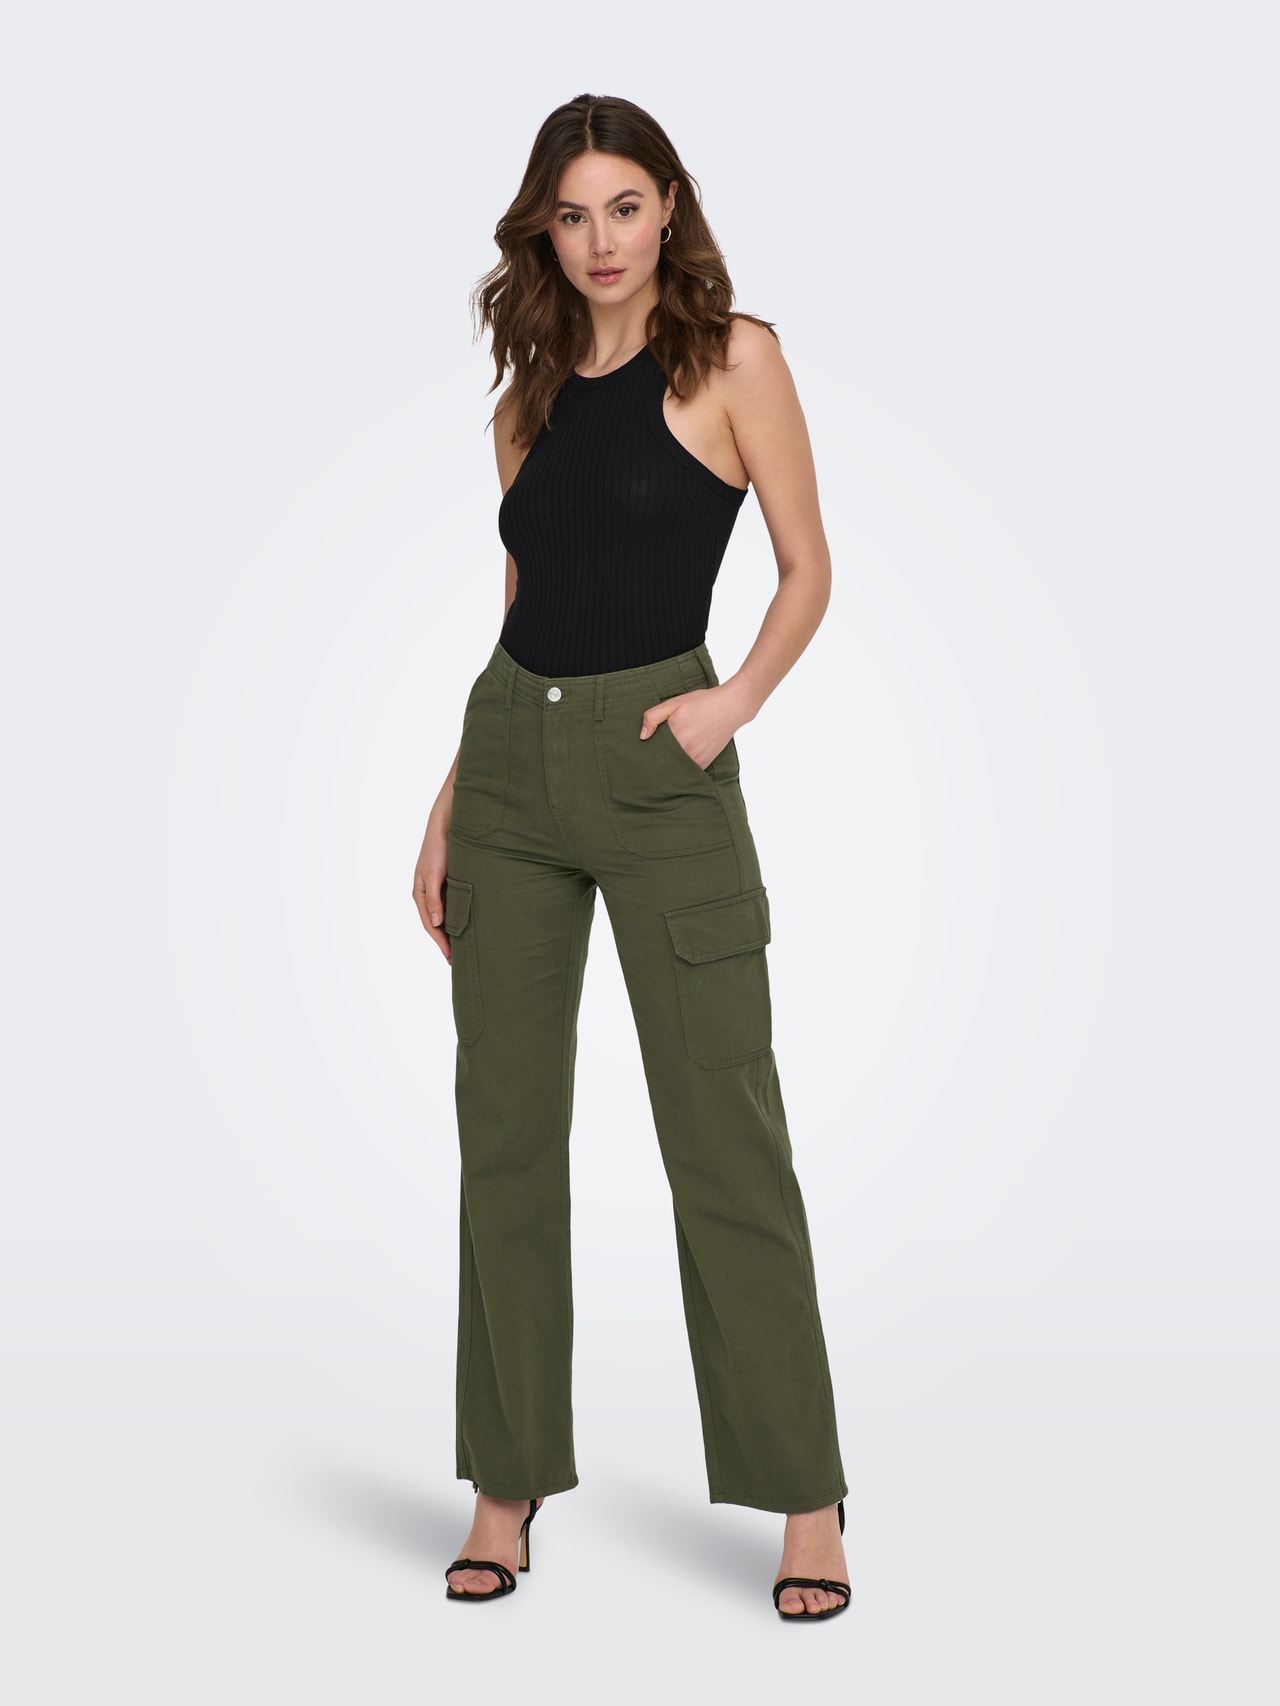 https://images.only.com/15300808/4295998/005/only-highwaistedcargotrousers-green.jpg?v=a4a693d7a85e02ee067ca3269dbf17e3&format=webp&width=1280&quality=90&key=25-0-3